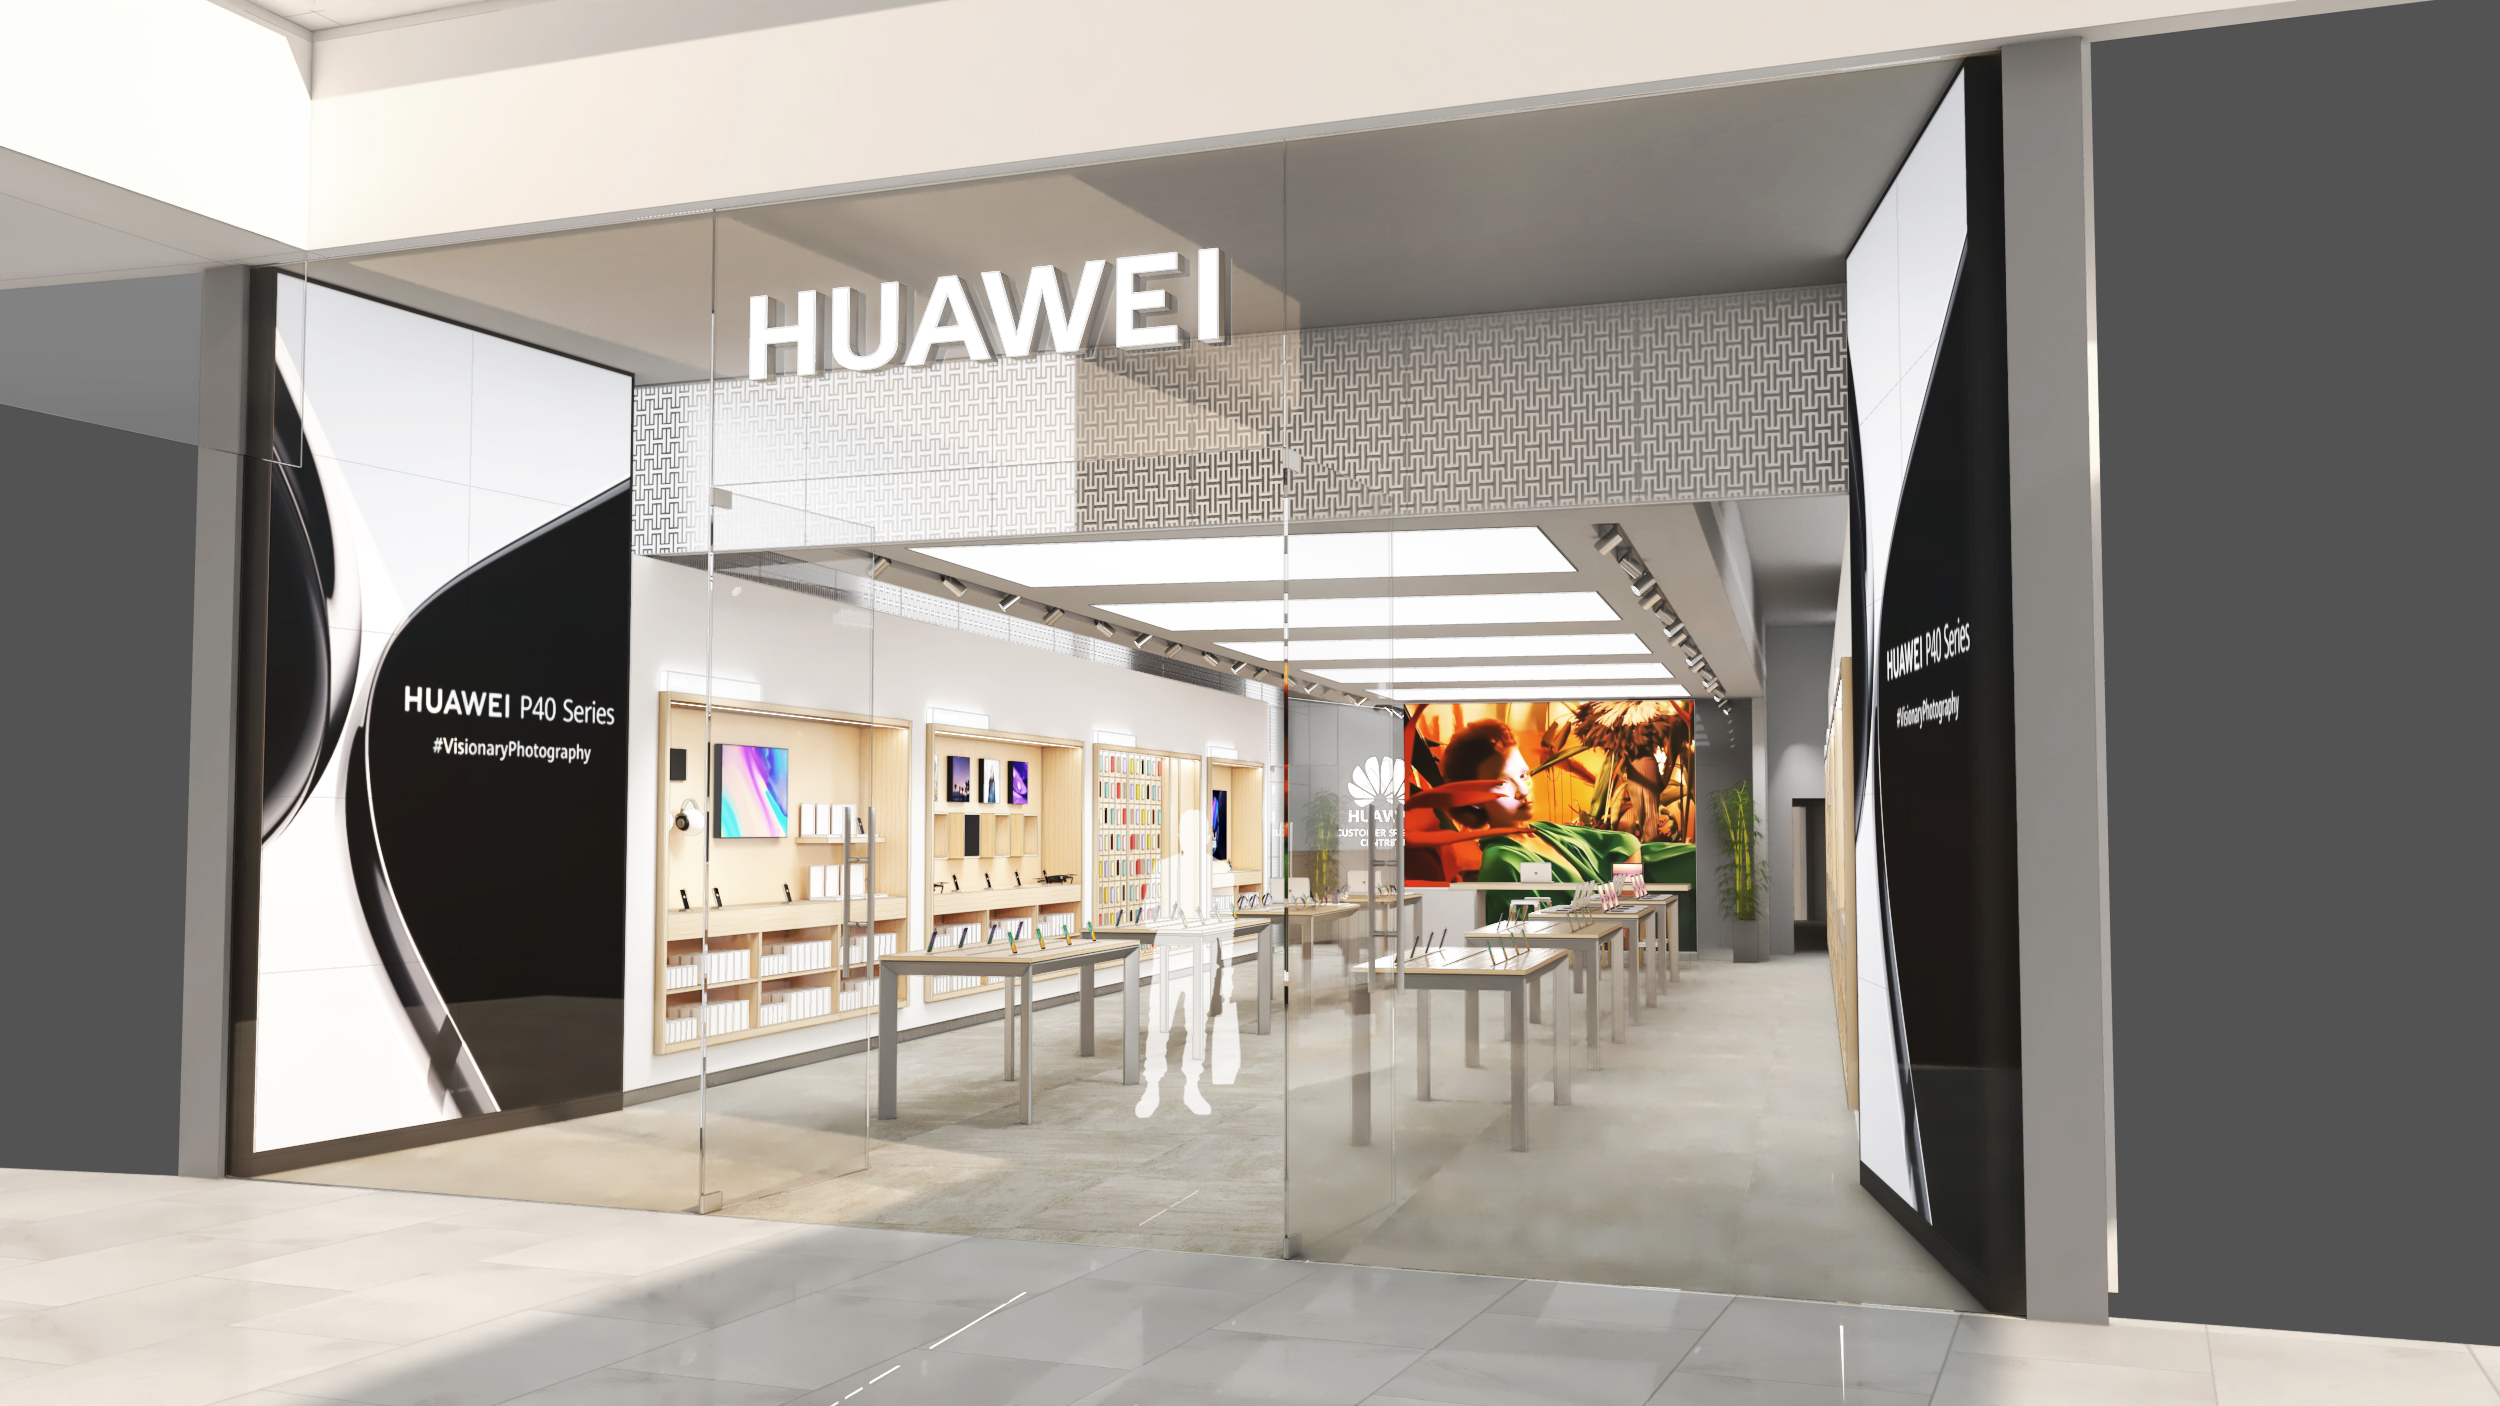 Huawei opens its first ever physical store in the UK, calls it a “hugely important market”